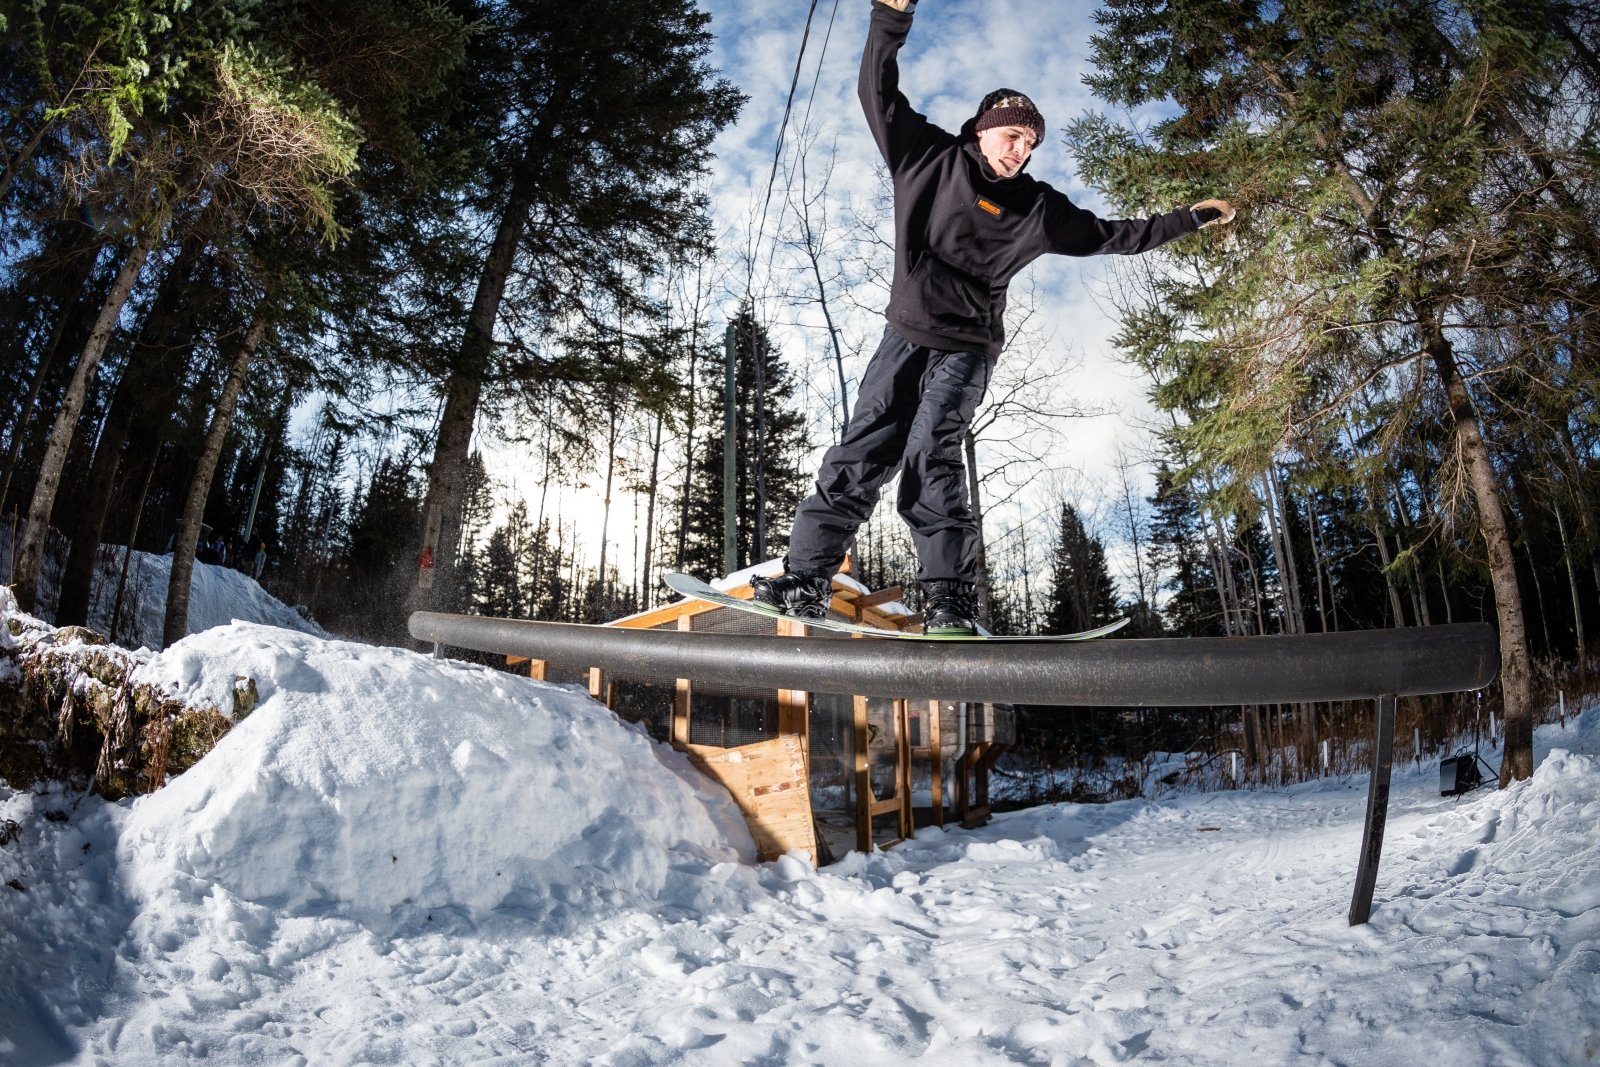 LOUIF PARADIS ADDED TO OUR SNOW TEAM - Boutique Homies